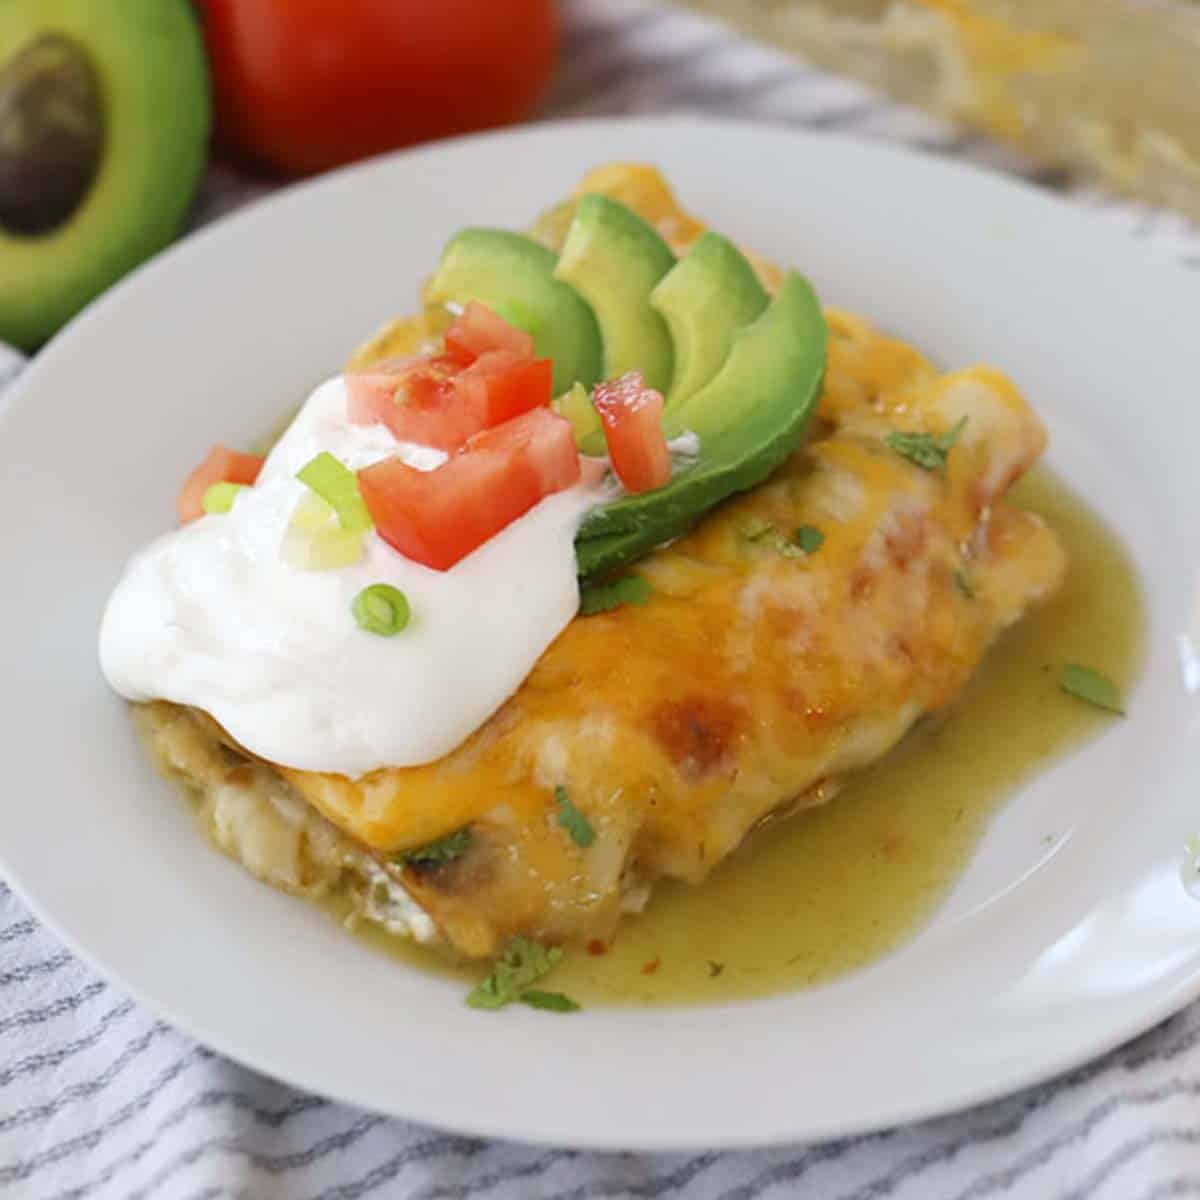 green chile chicken enchilada topped with sour cream, avocados,and tomatoes